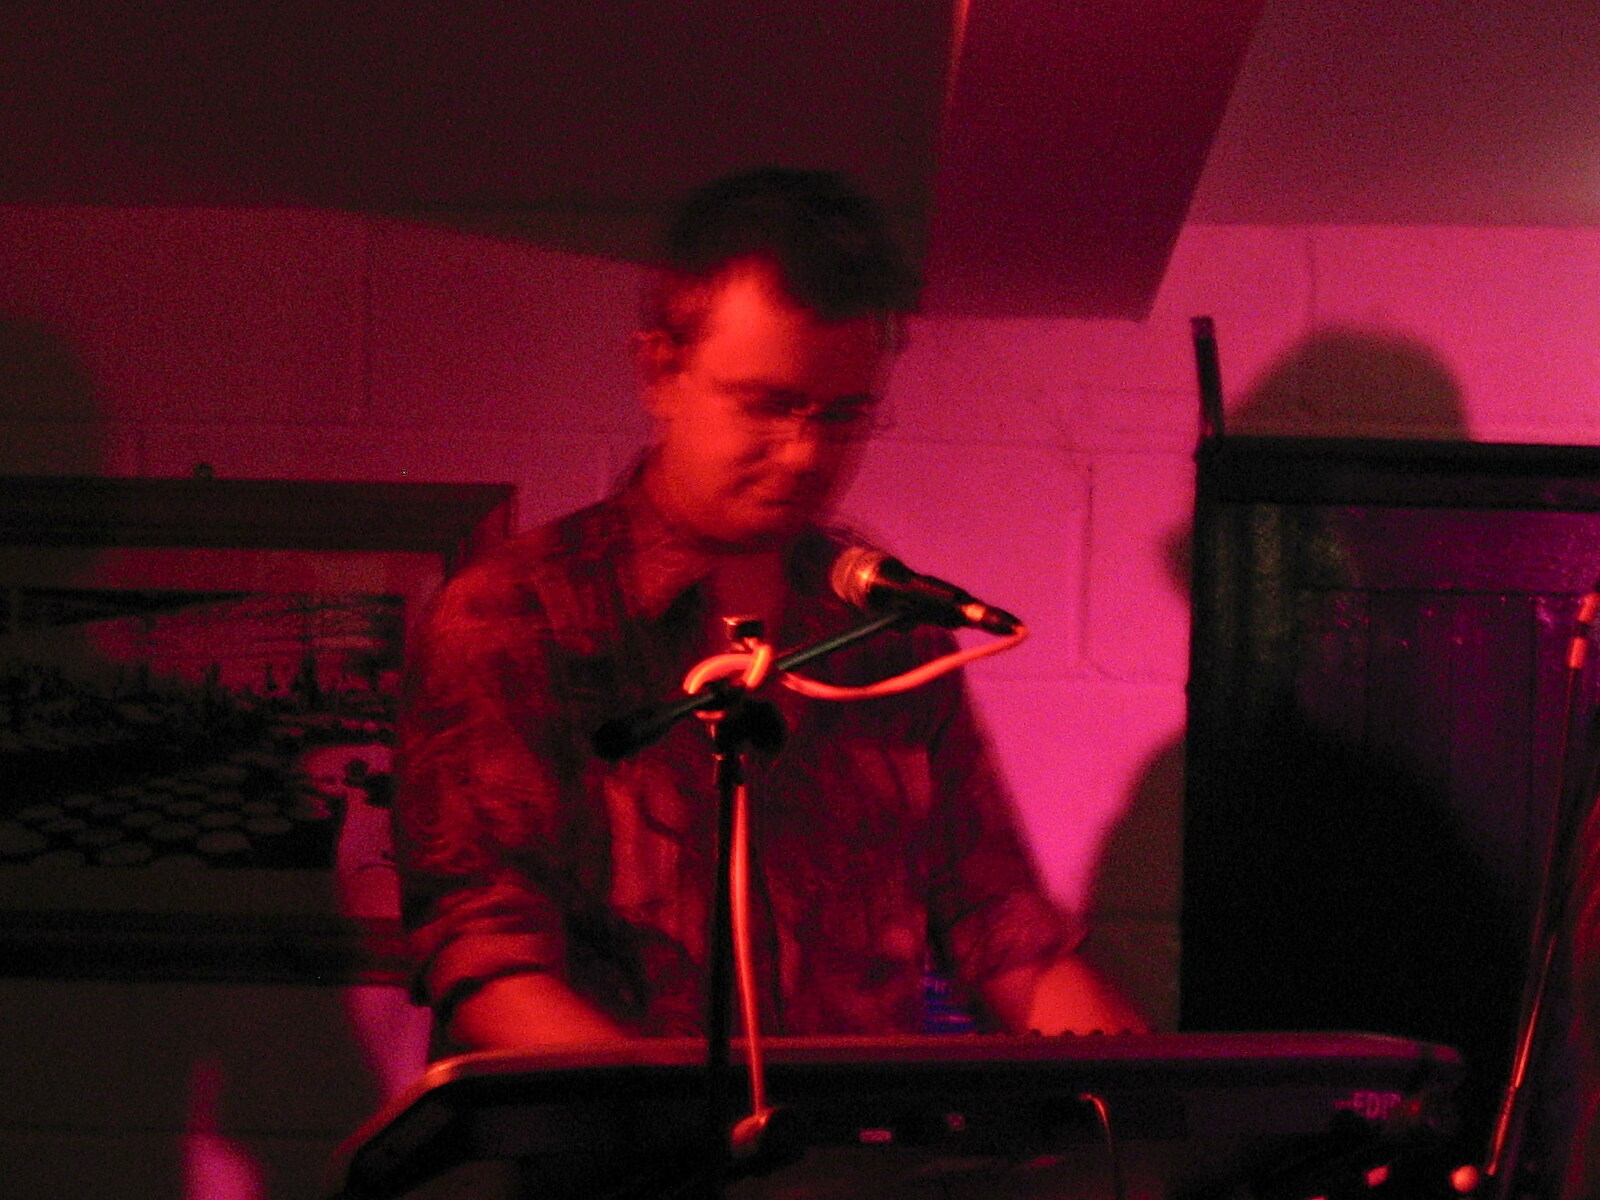 Some keyboard action from The BBS, and the Big Skies of East Anglia, Diss and Hunston, Norfolk and Suffolk - 6th August 2005